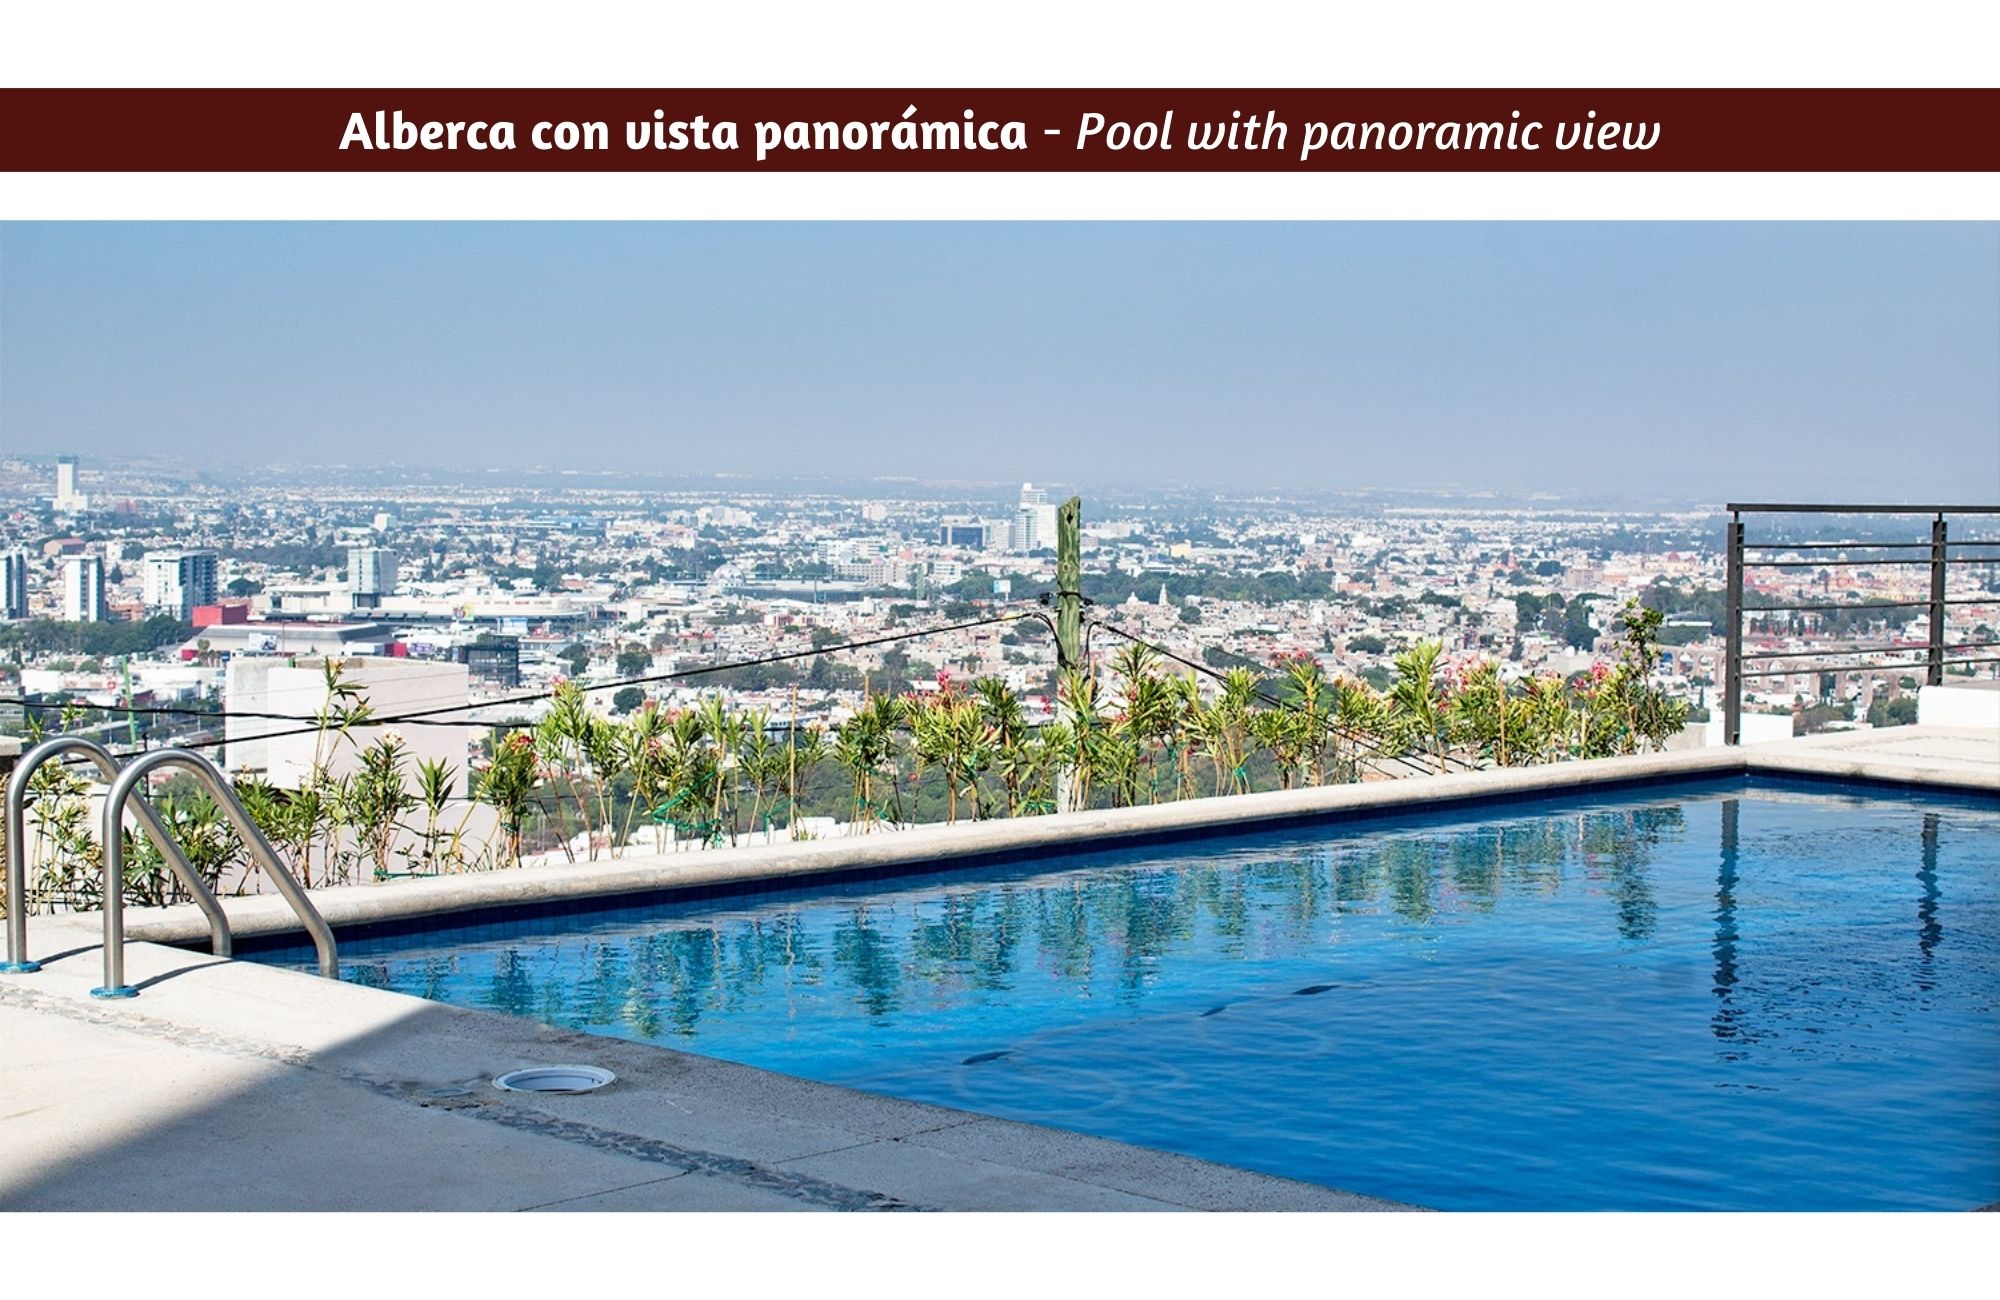 Apartment with garden, and private terrace, gym, indoor pool, for sale, Queretaro.